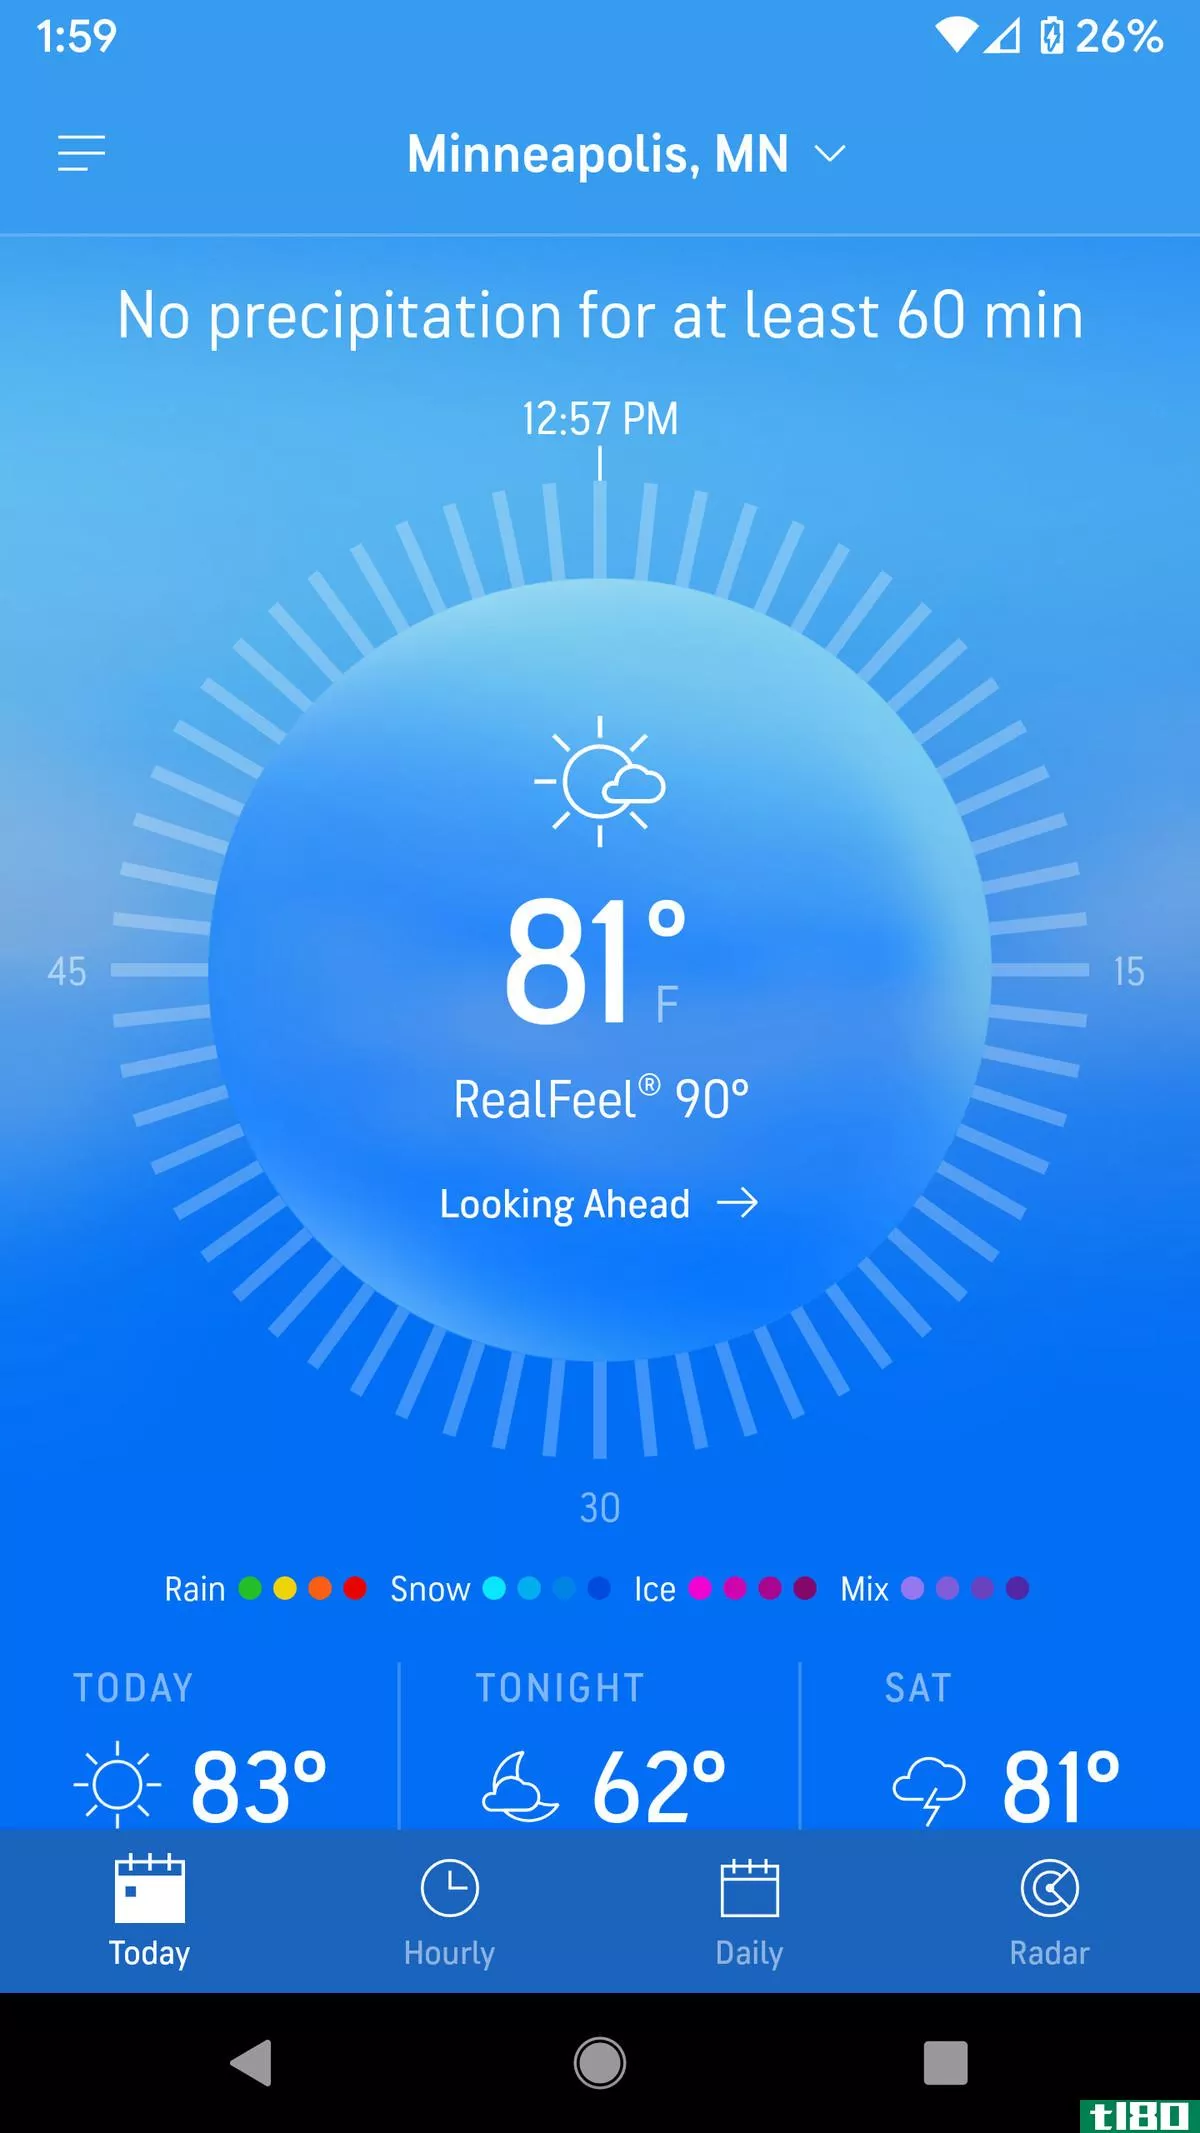 AccuWeather’s recently redesigned interface is attractive and informative.